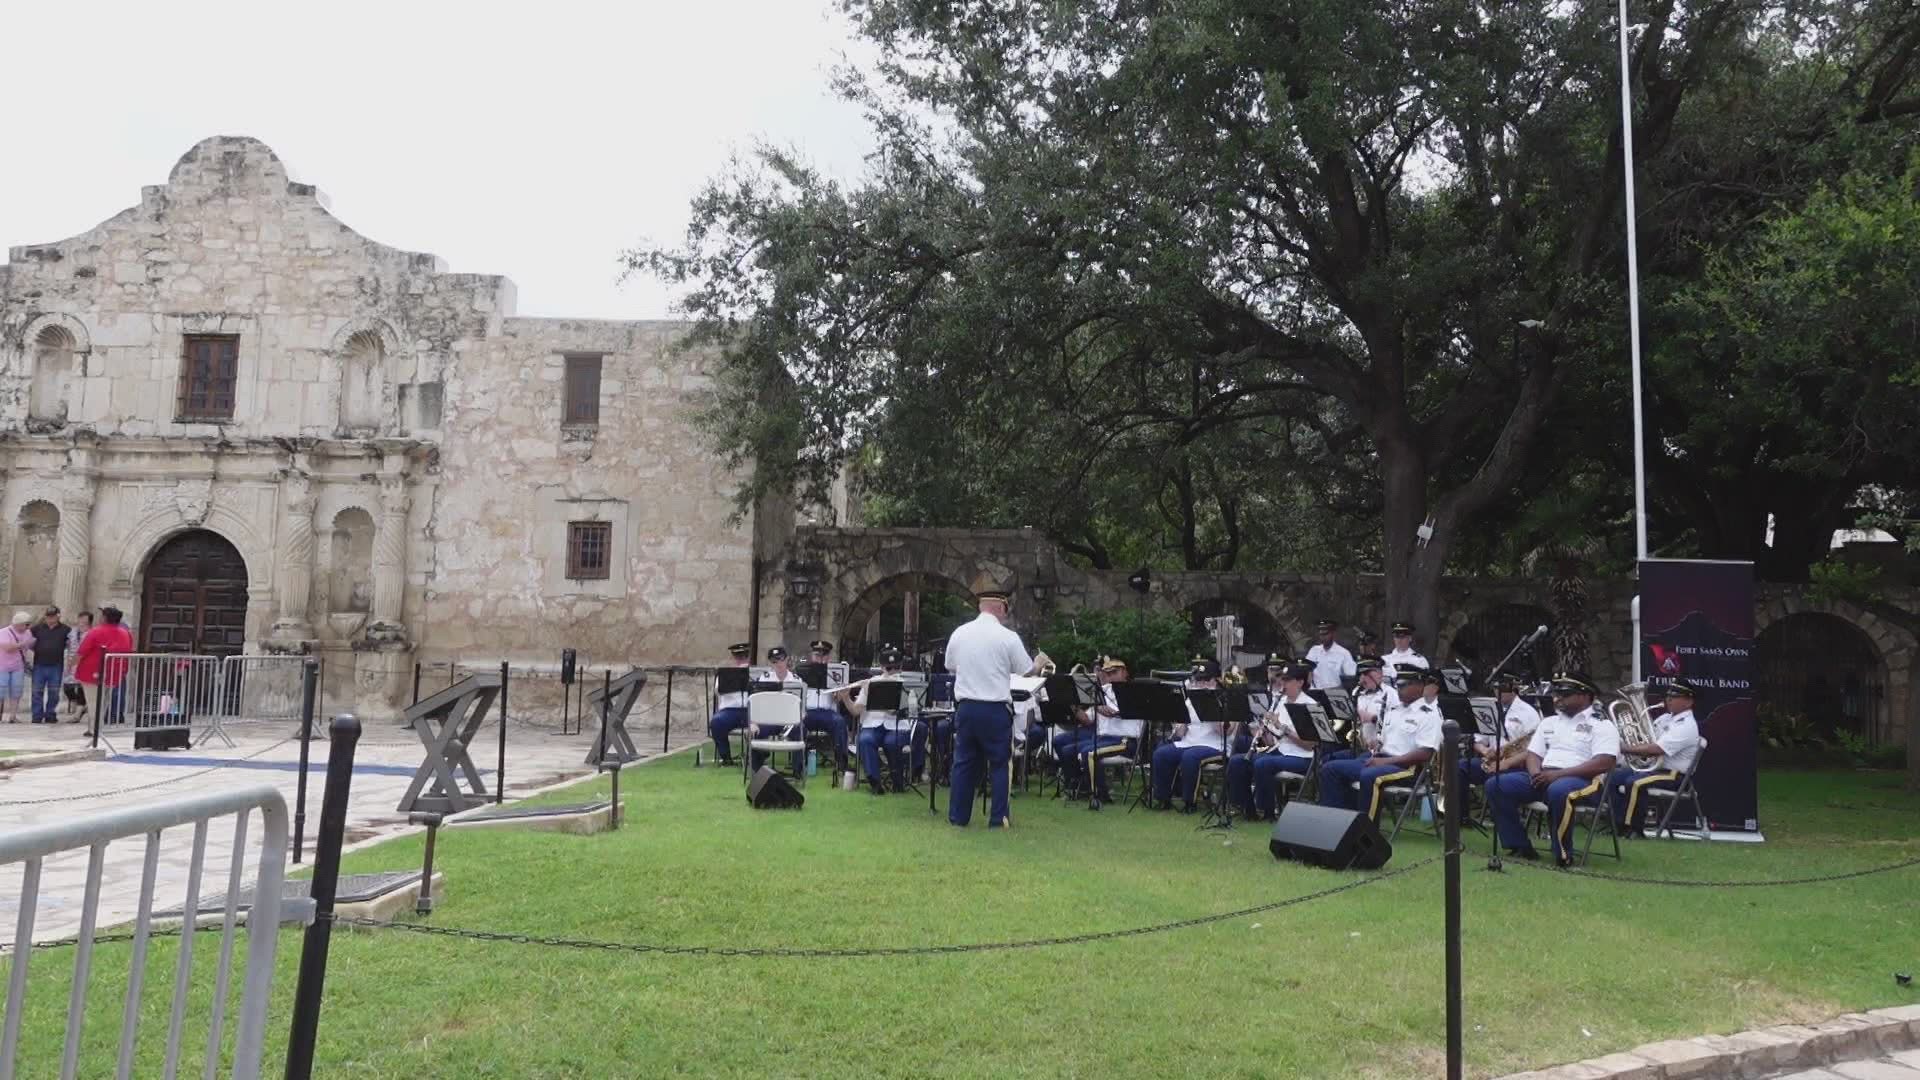 Army Day at the Alamo is one of four events honoring the military during San Antonio's biggest party.